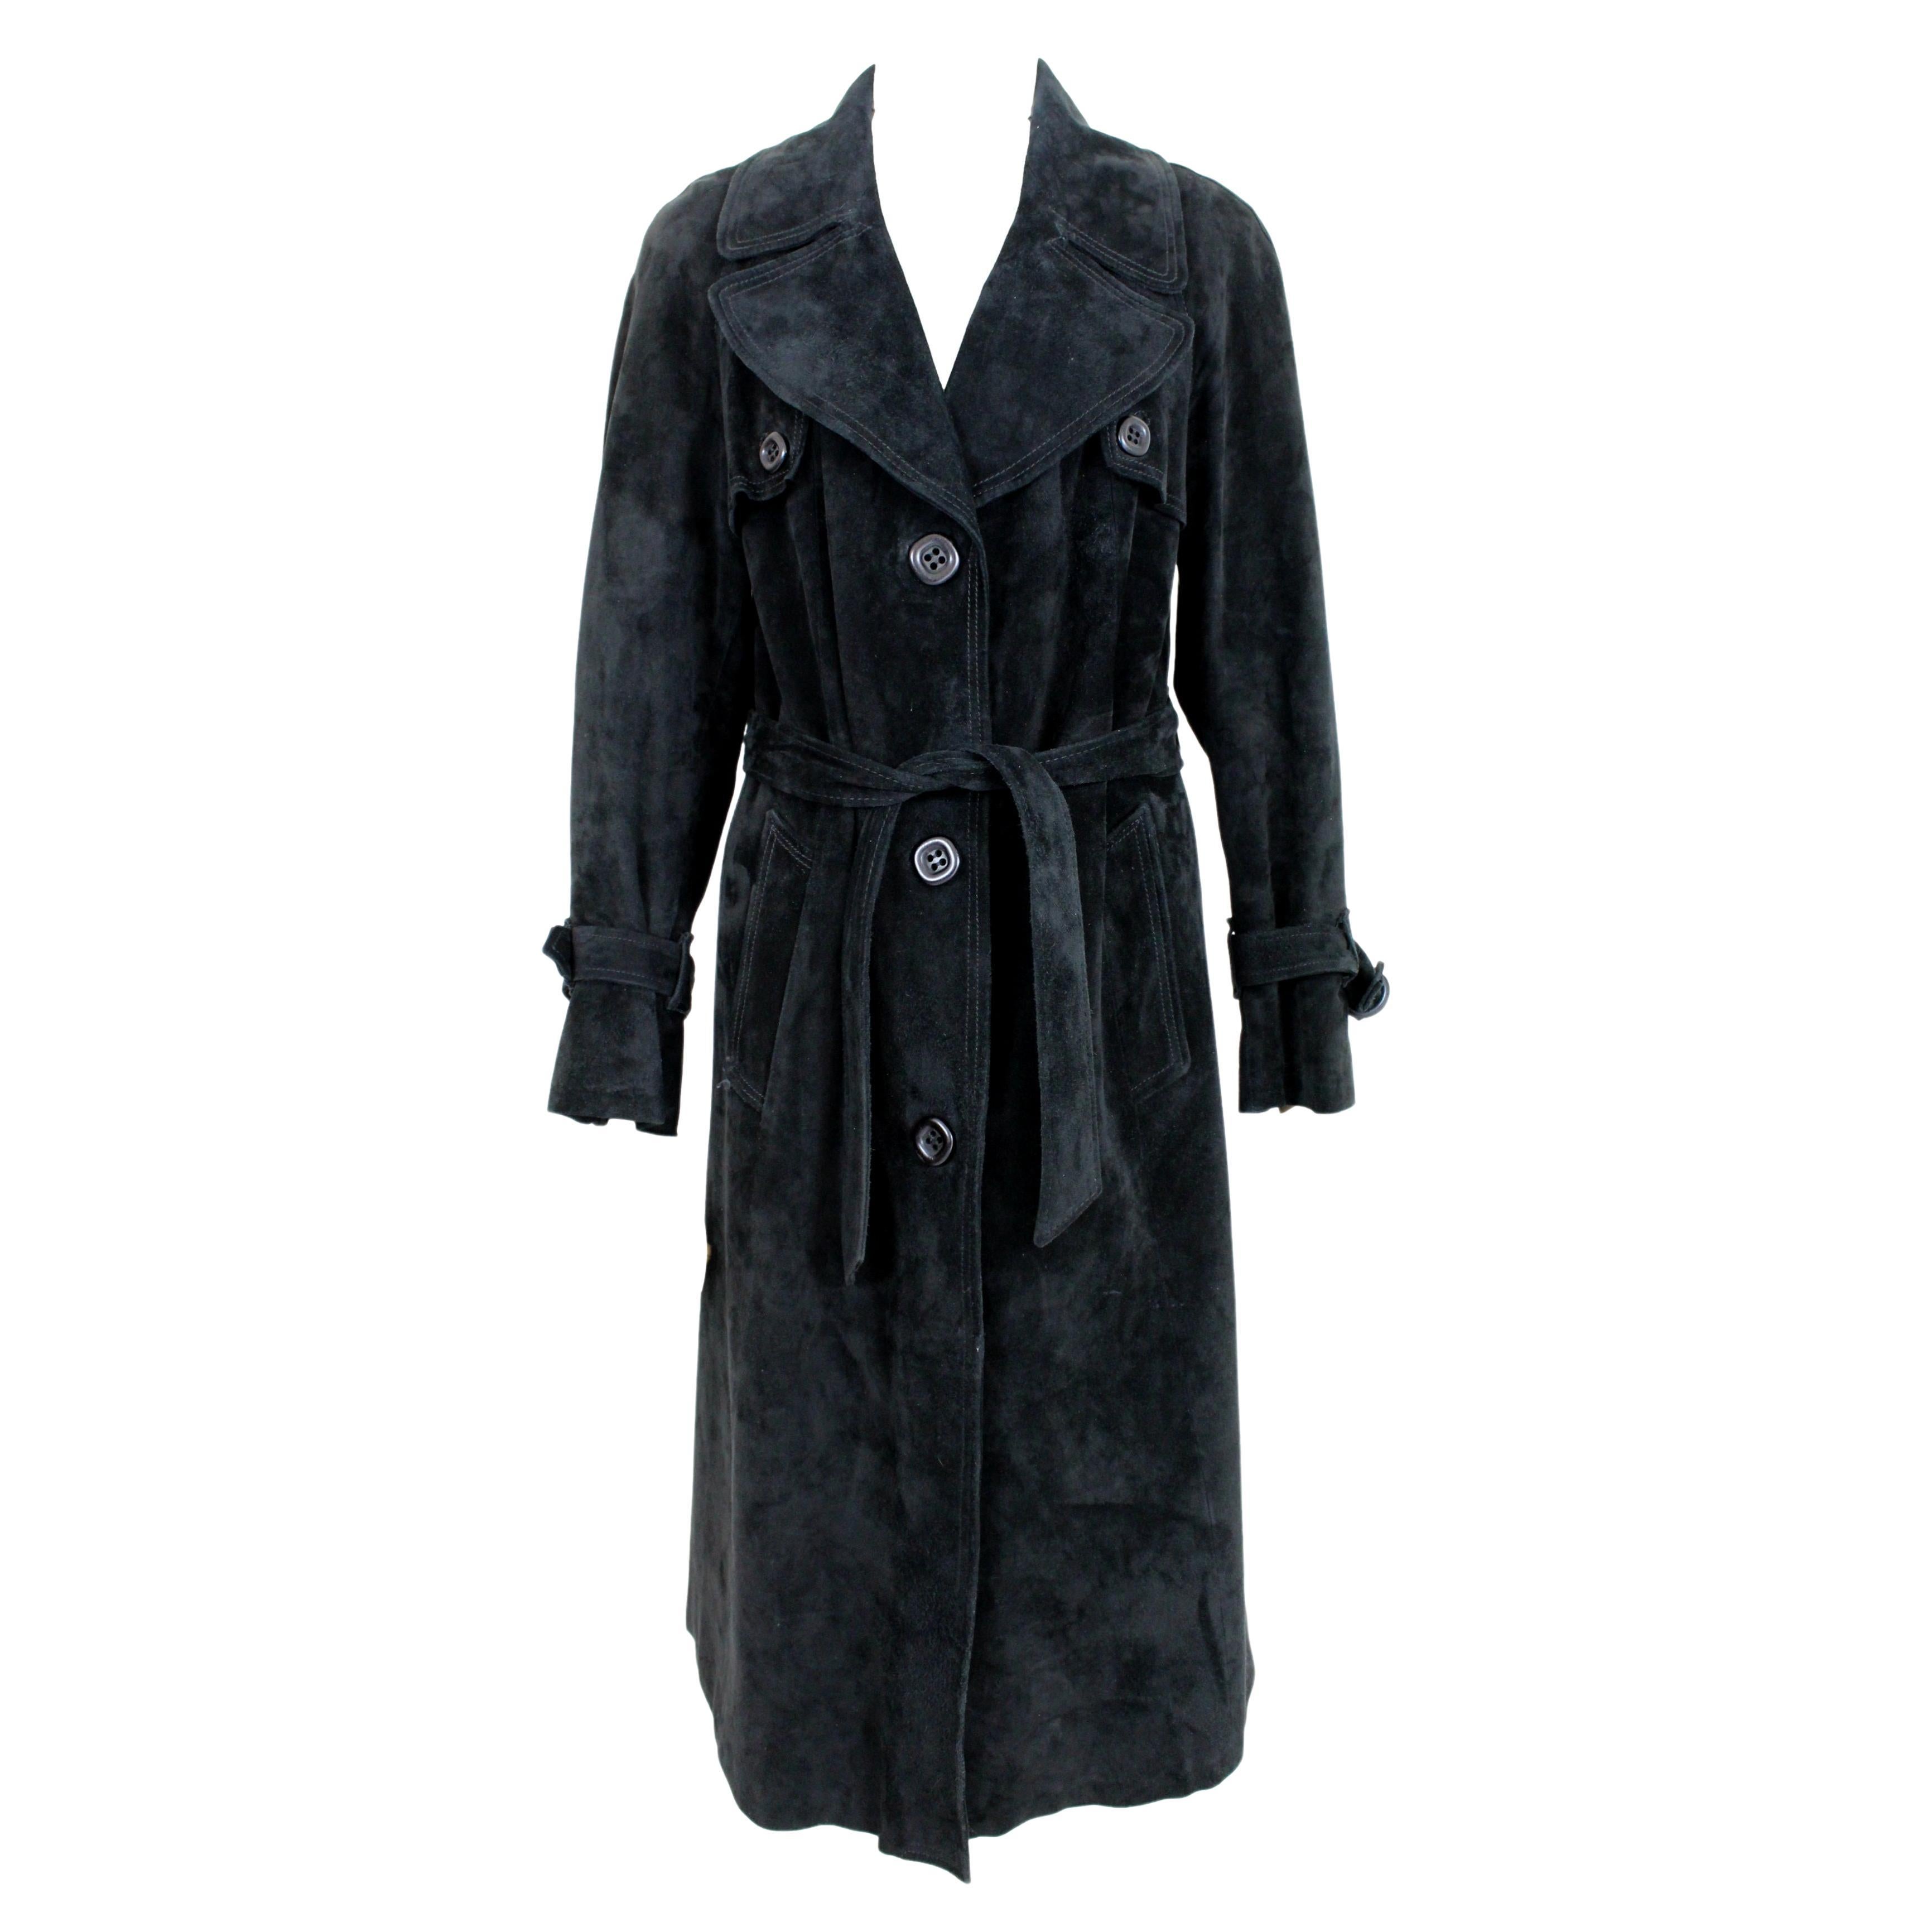 Suede Leather Black Vintage Trench Coat